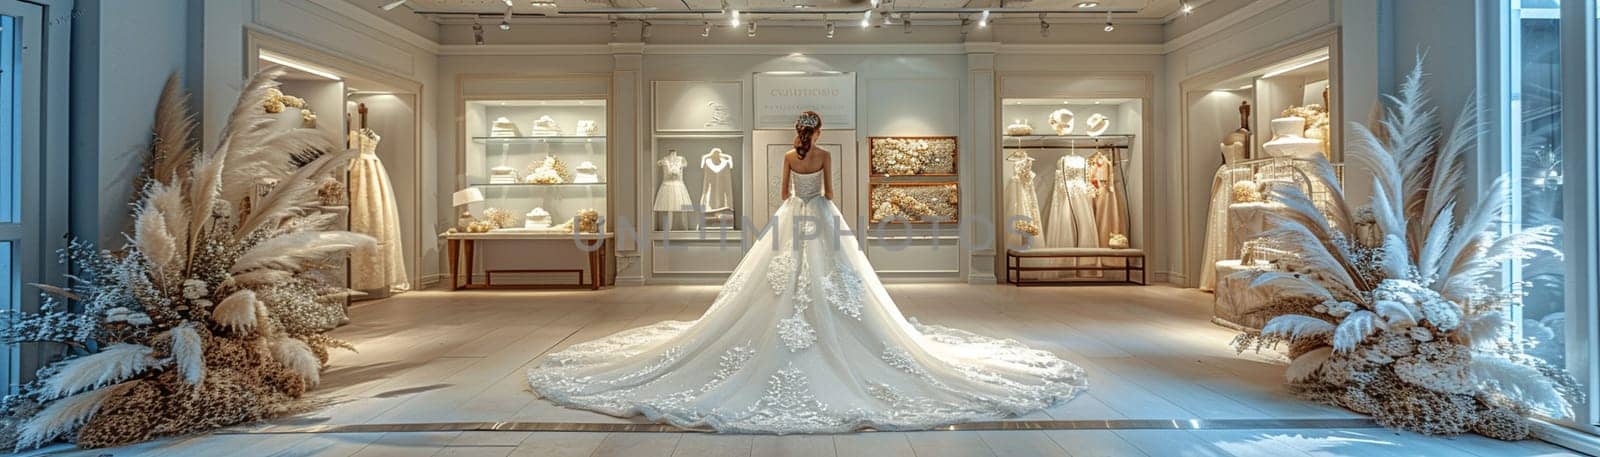 Elegant Bridal Boutique with Soft Focus on Gowns and Accessories by Benzoix